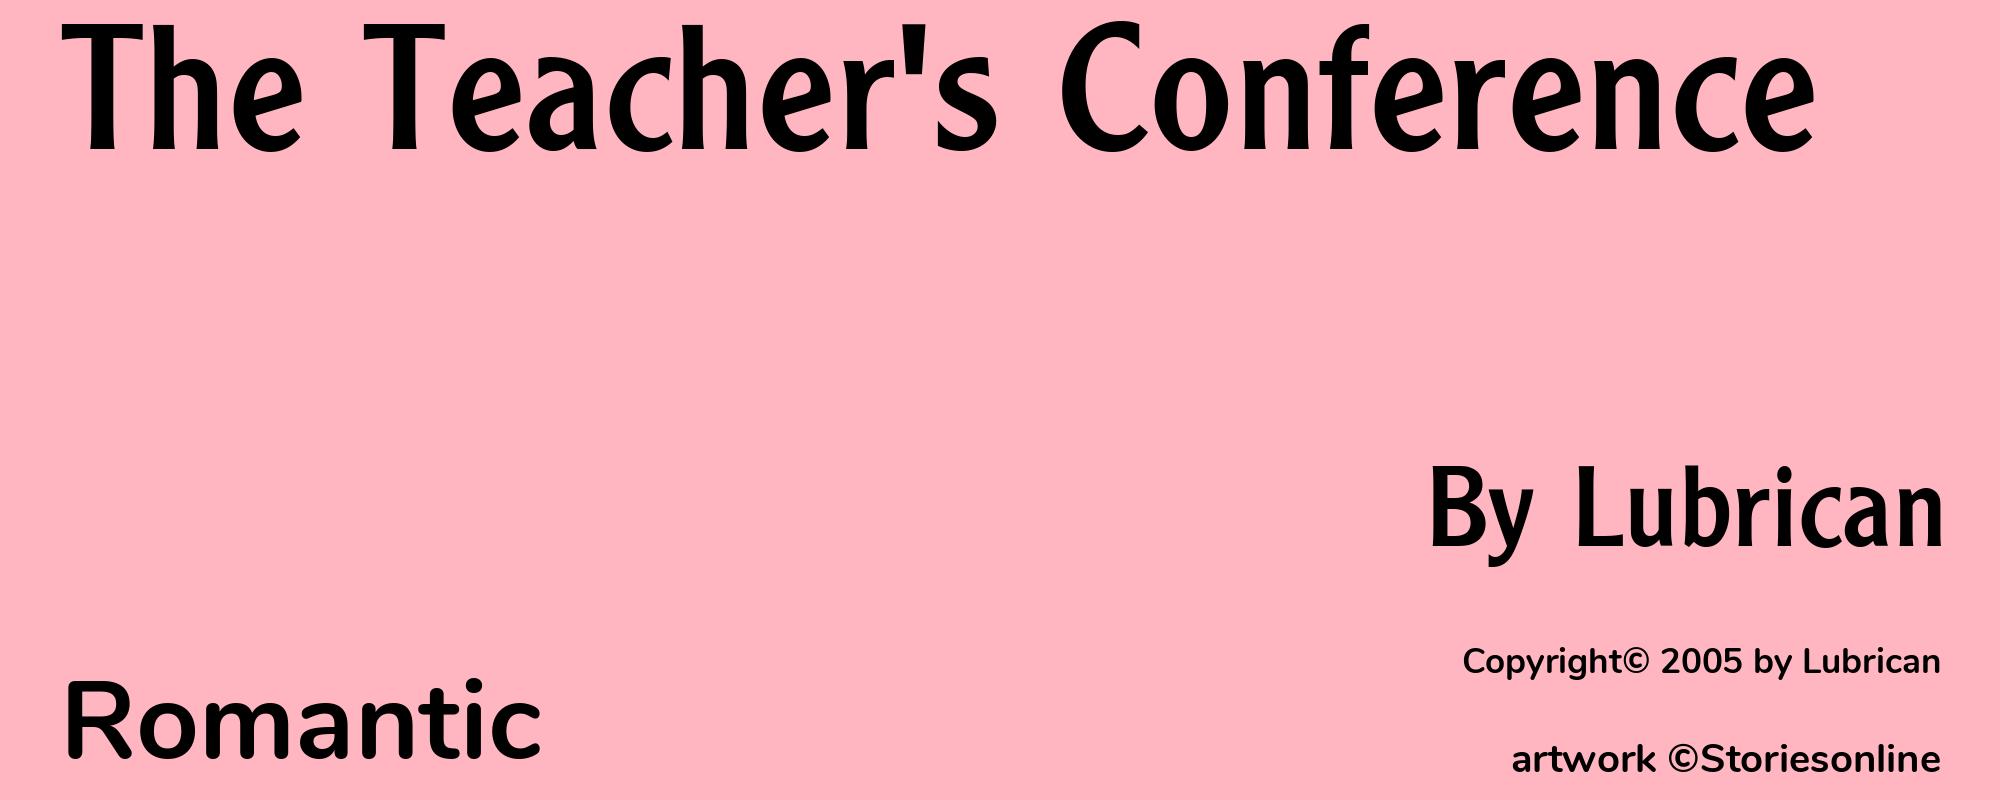 The Teacher's Conference - Cover